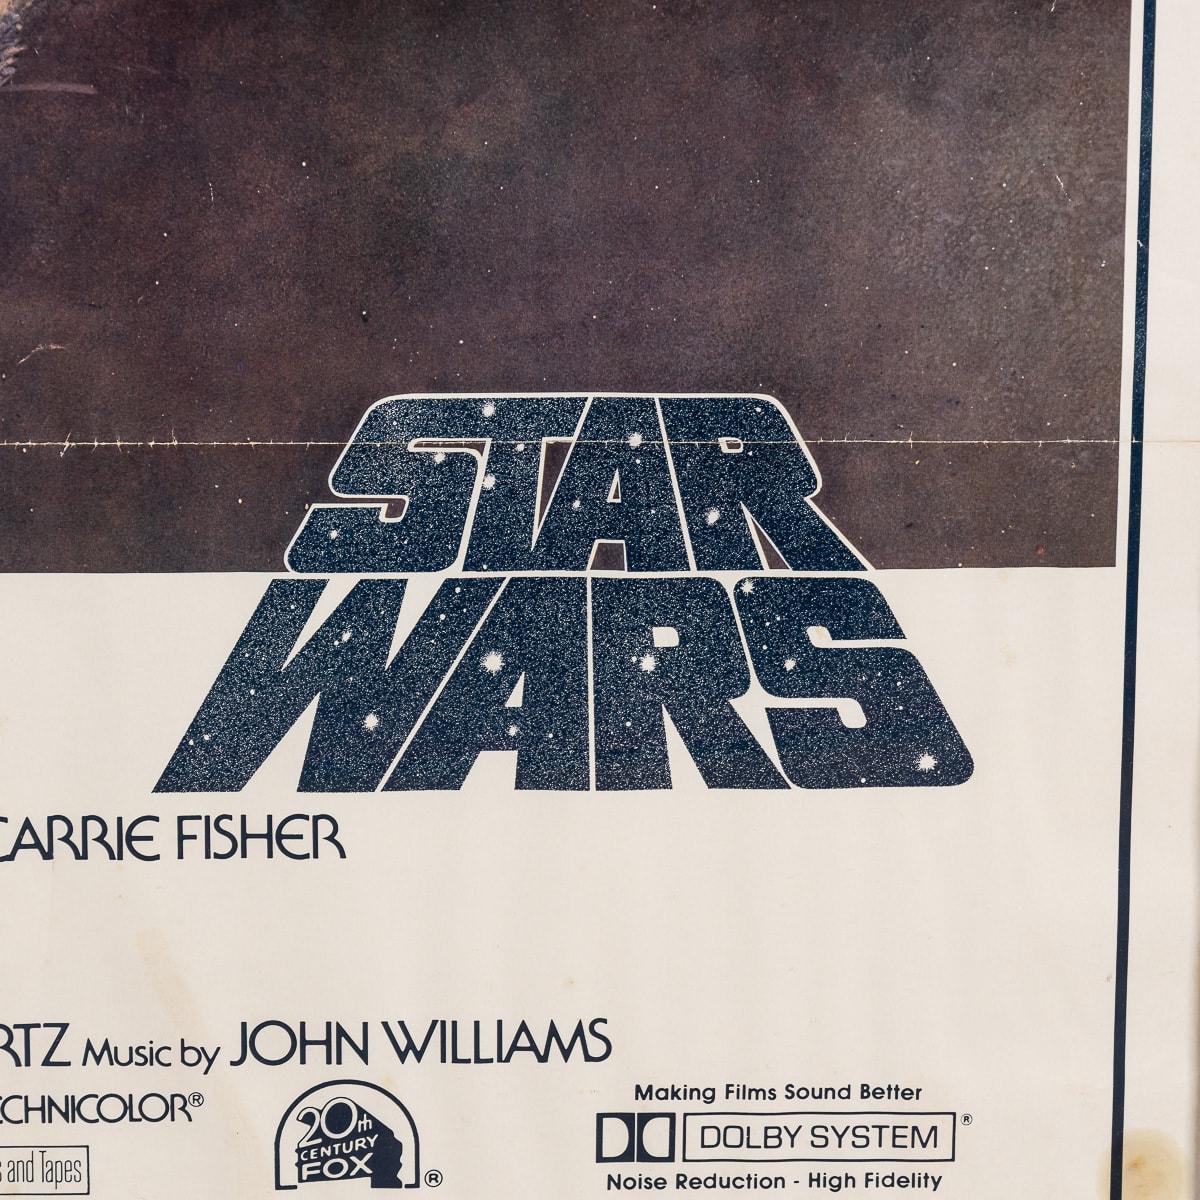 Original U.S. Release Star Wars 'A New Hope' Style A Poster 77/21 c.1977 For Sale 6